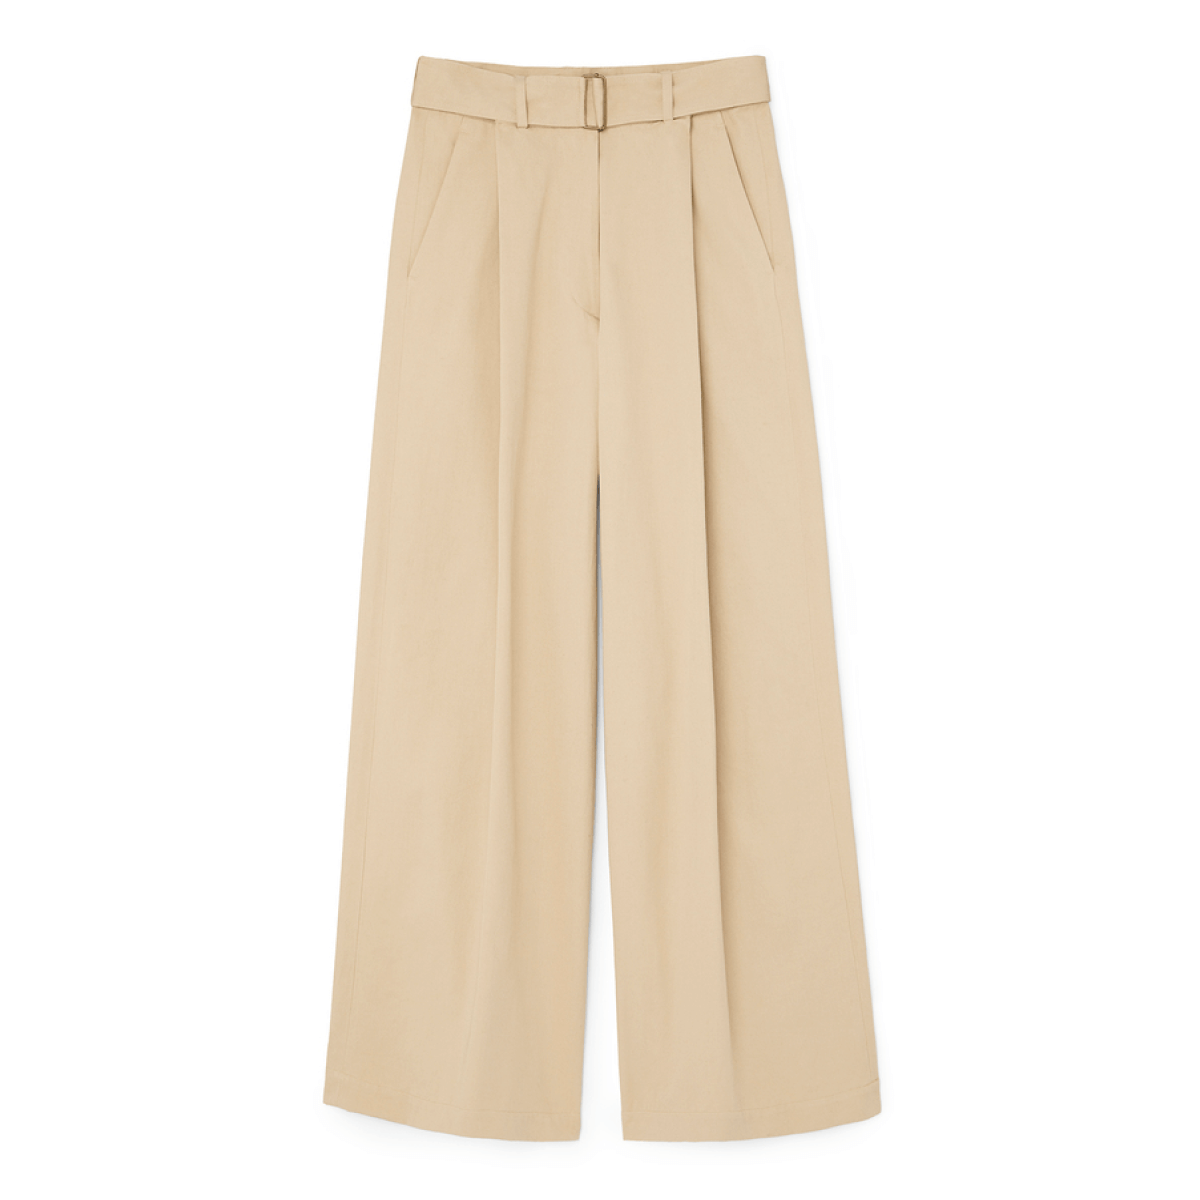 G. Label seamus high-waisted pleated pants